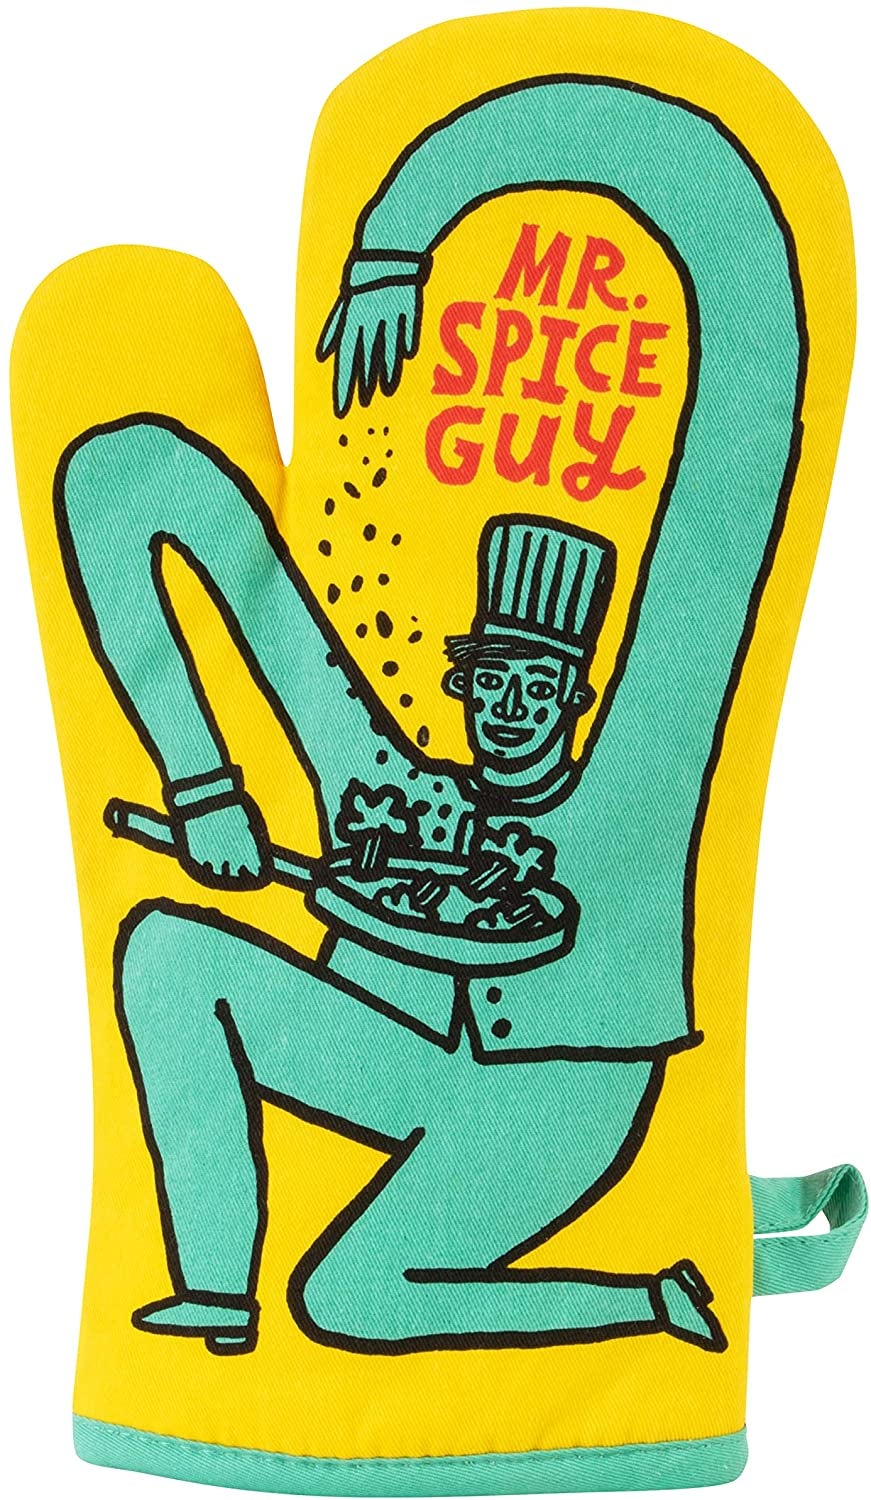 yellow oven mitt that reads "mr. spice guy"